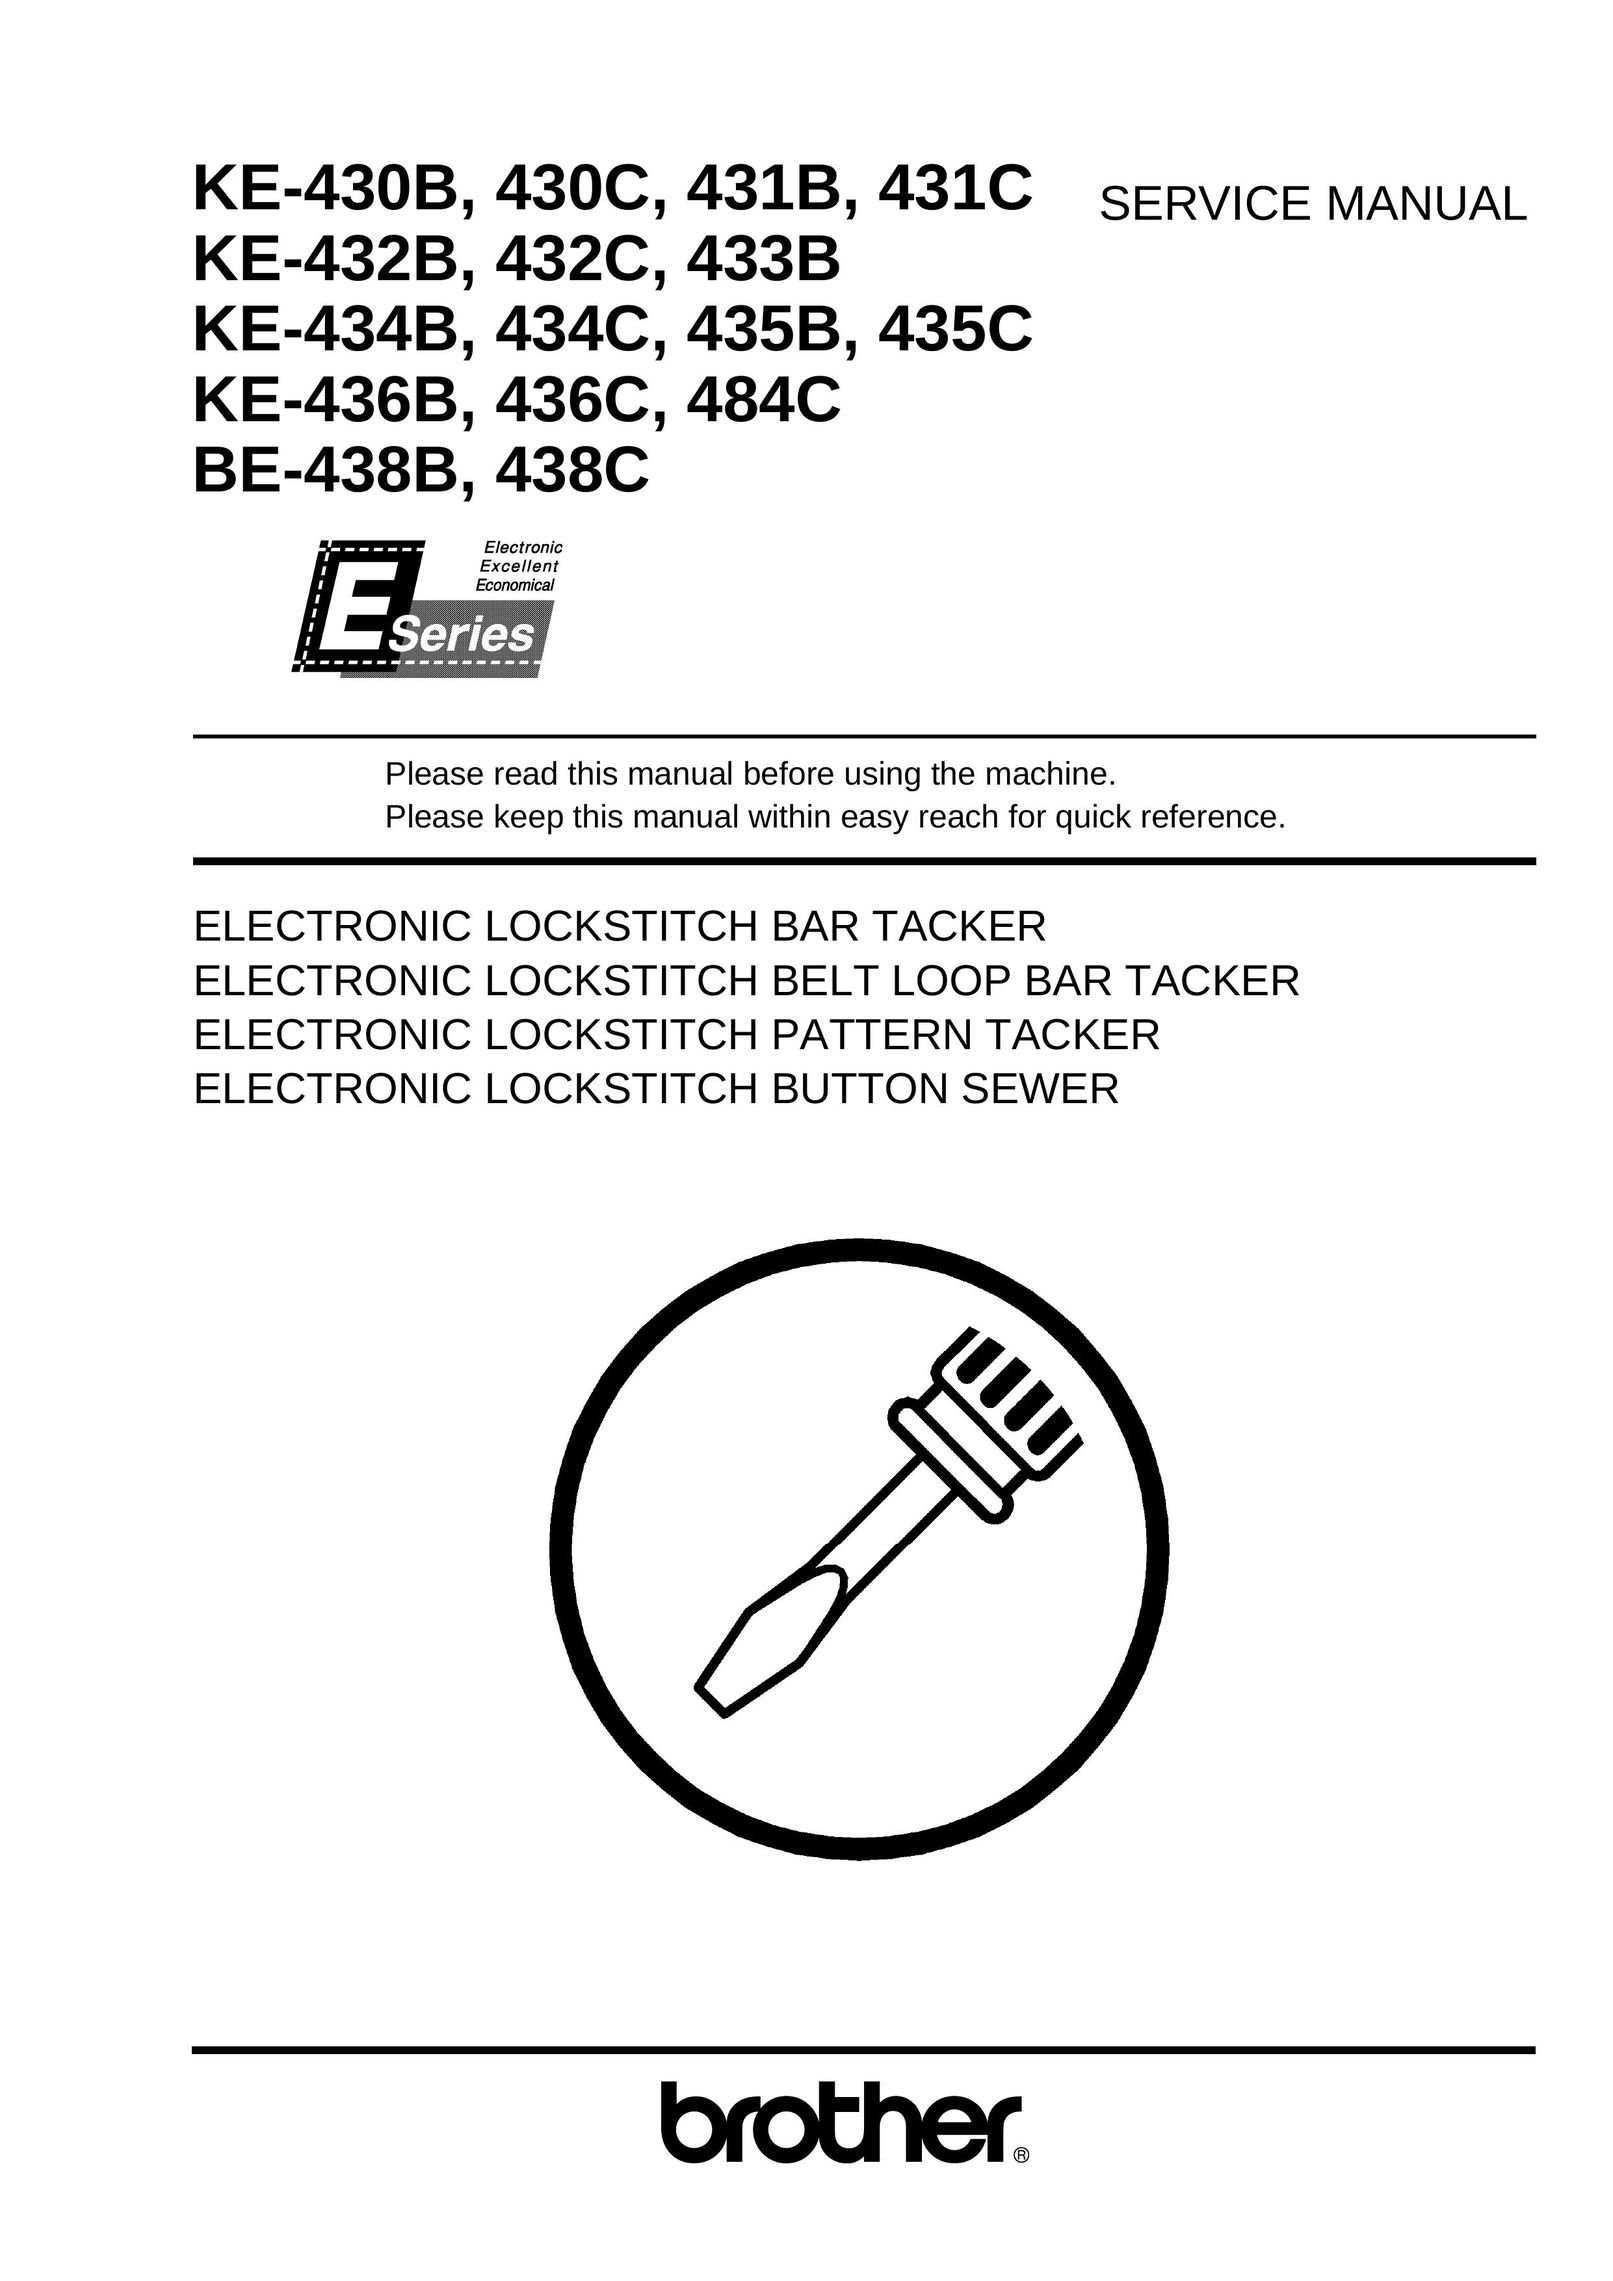 Brother 430C Sewing Machine User Manual